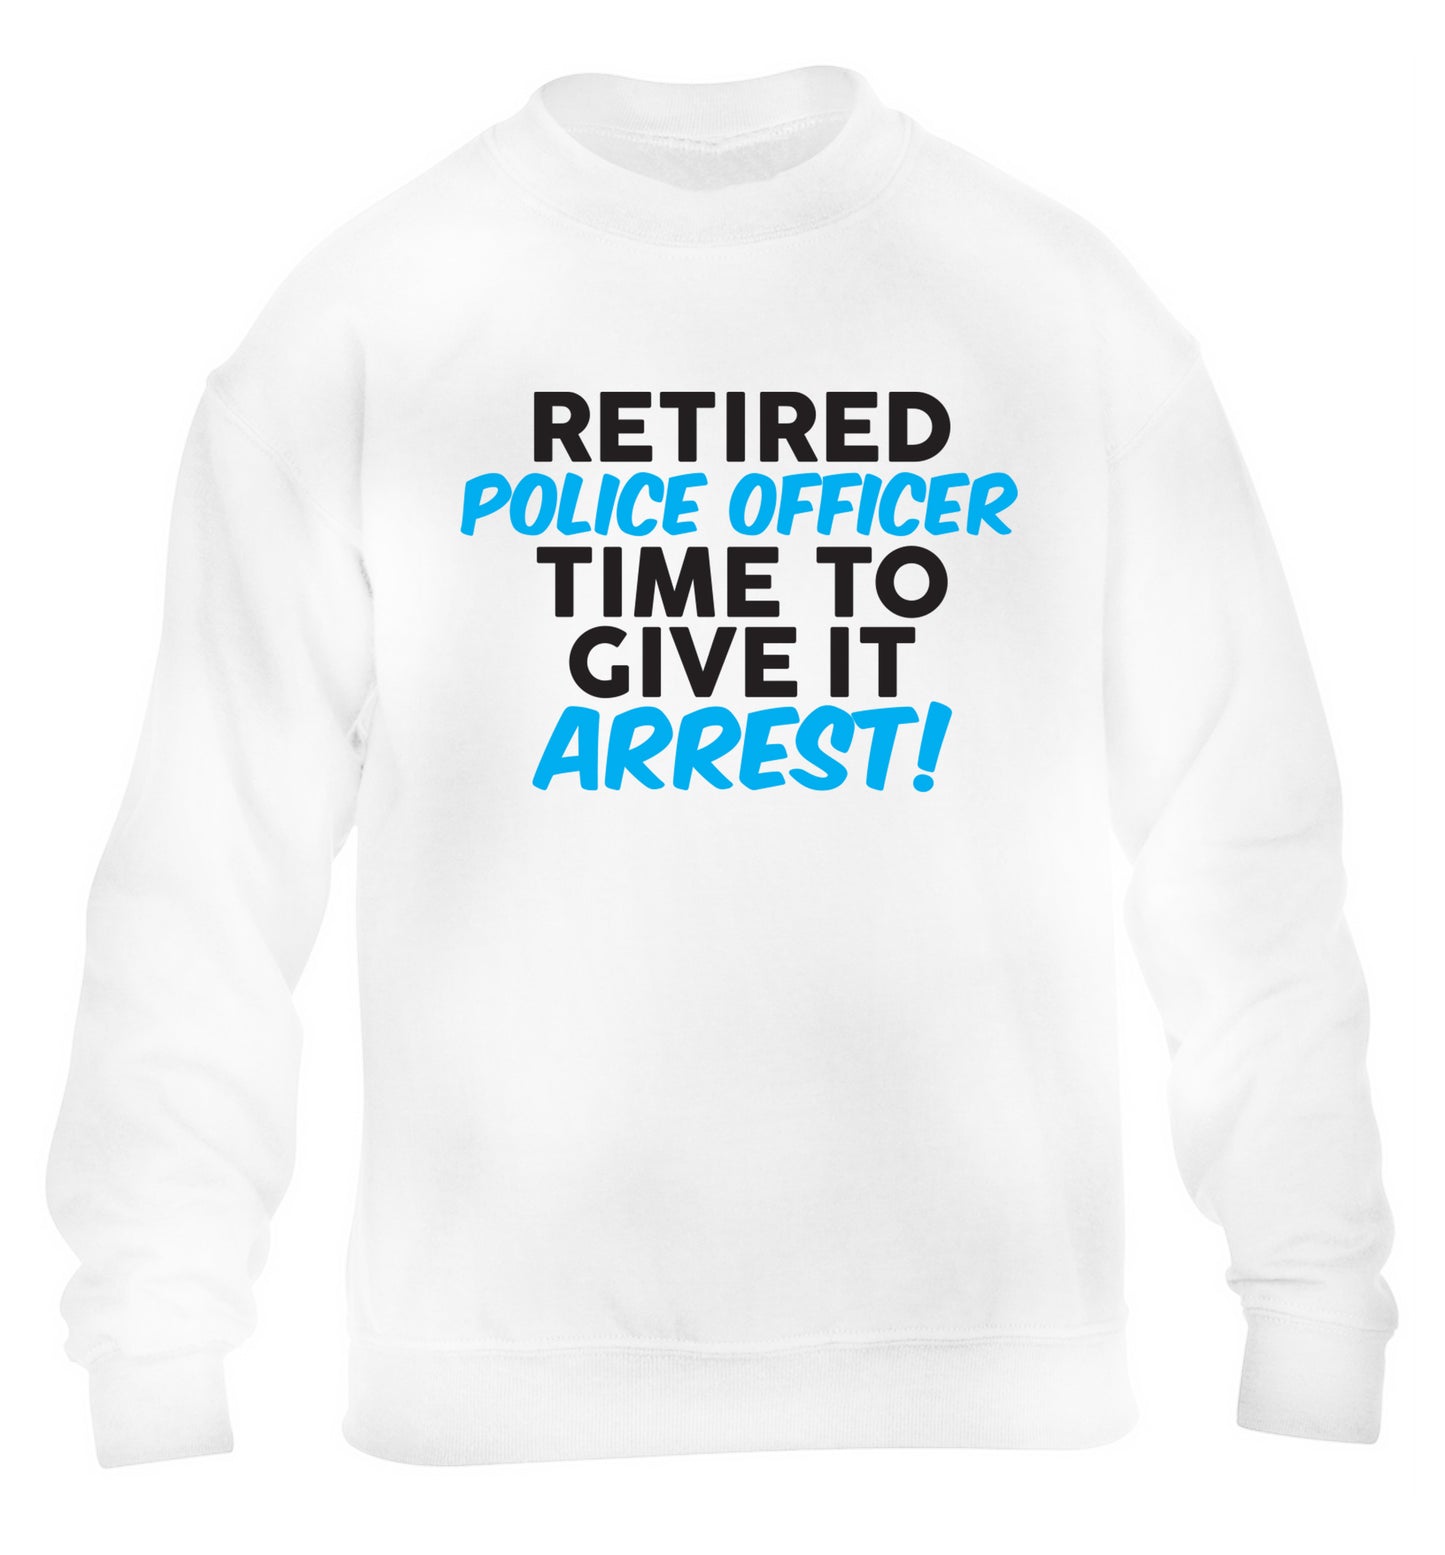 Retired police officer time to give it arrest children's white sweater 12-13 Years